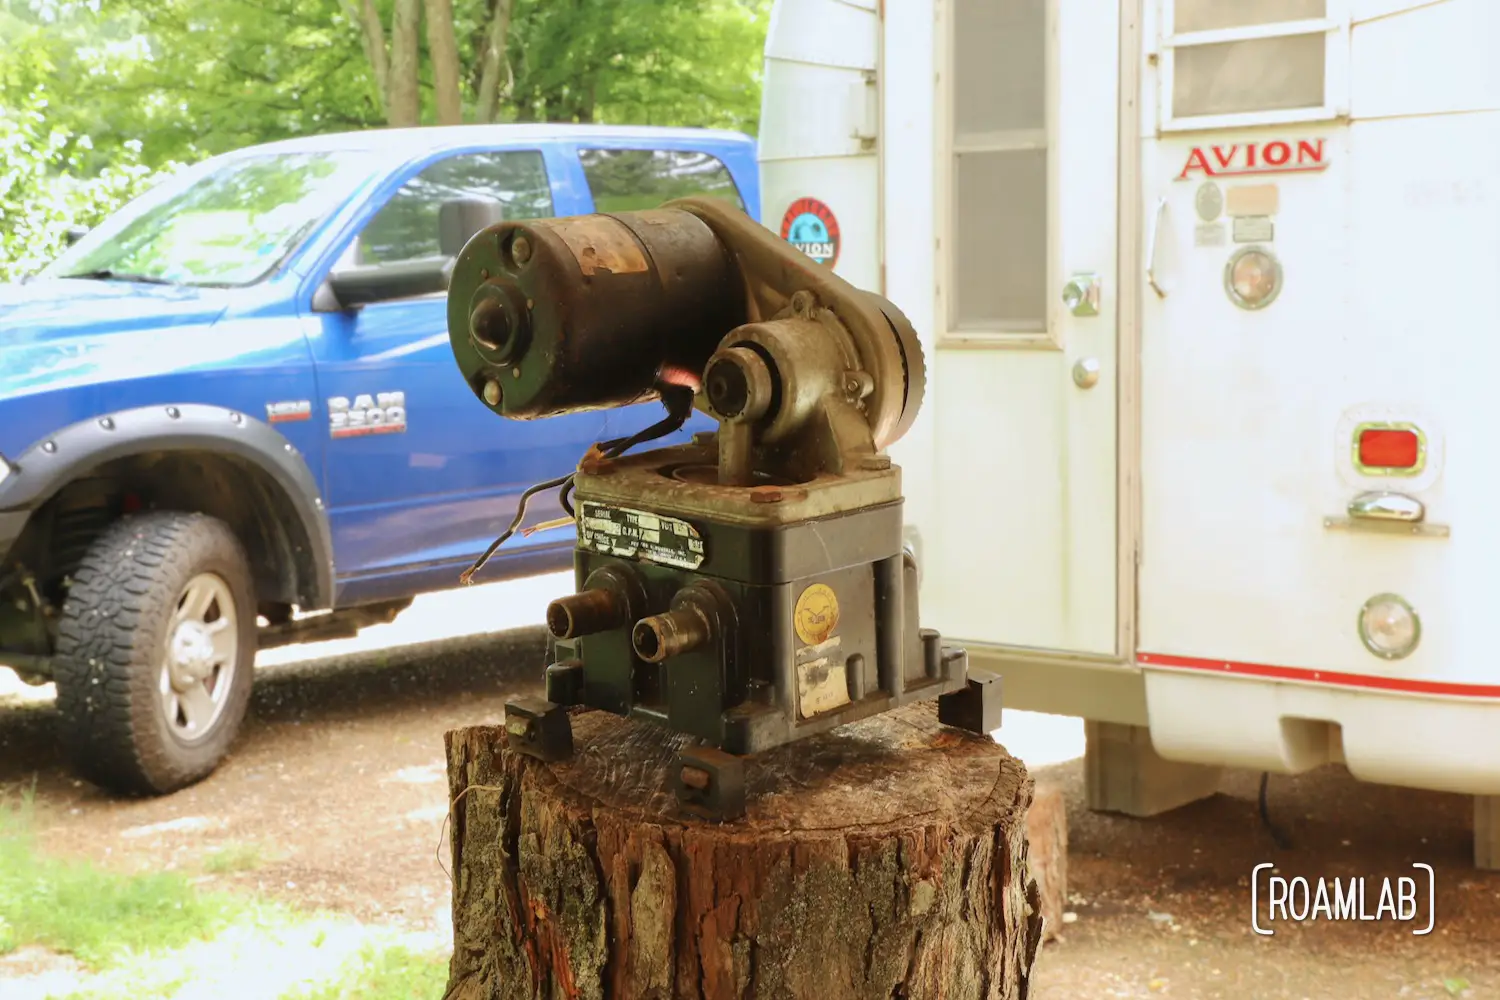 Our vintage 1970 Avion truck camper has its original Peters & Russell water pump. While we will be upgrading the water system, we test the pump for fun.